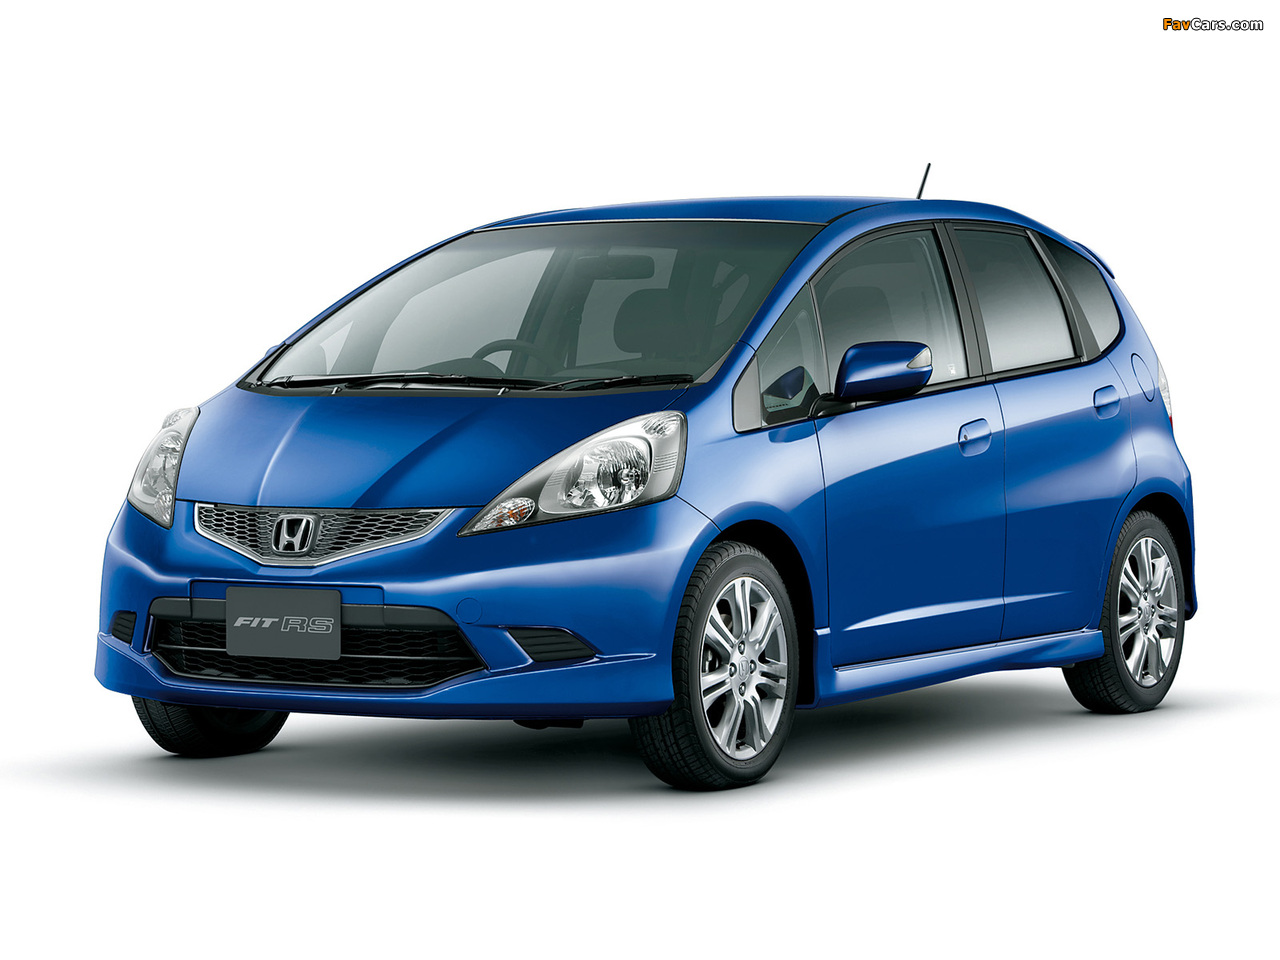 Honda Fit RS (GE) 2009 pictures (1280 x 960)